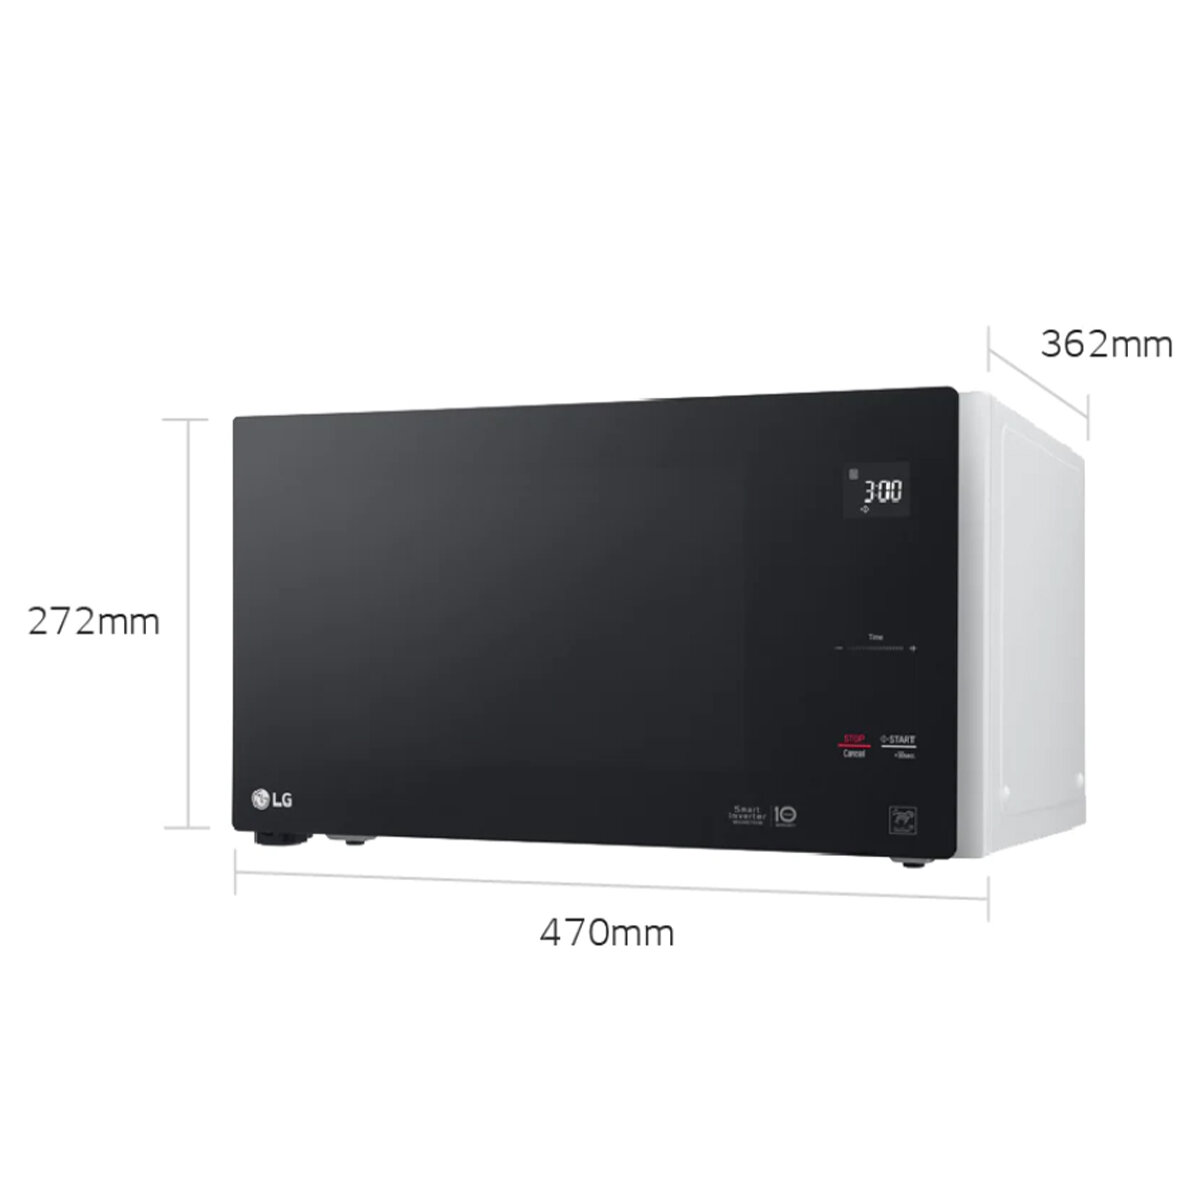 LG MS2596OW 25L NeoChef Smart Inverter 1000W Microwave Oven image 11